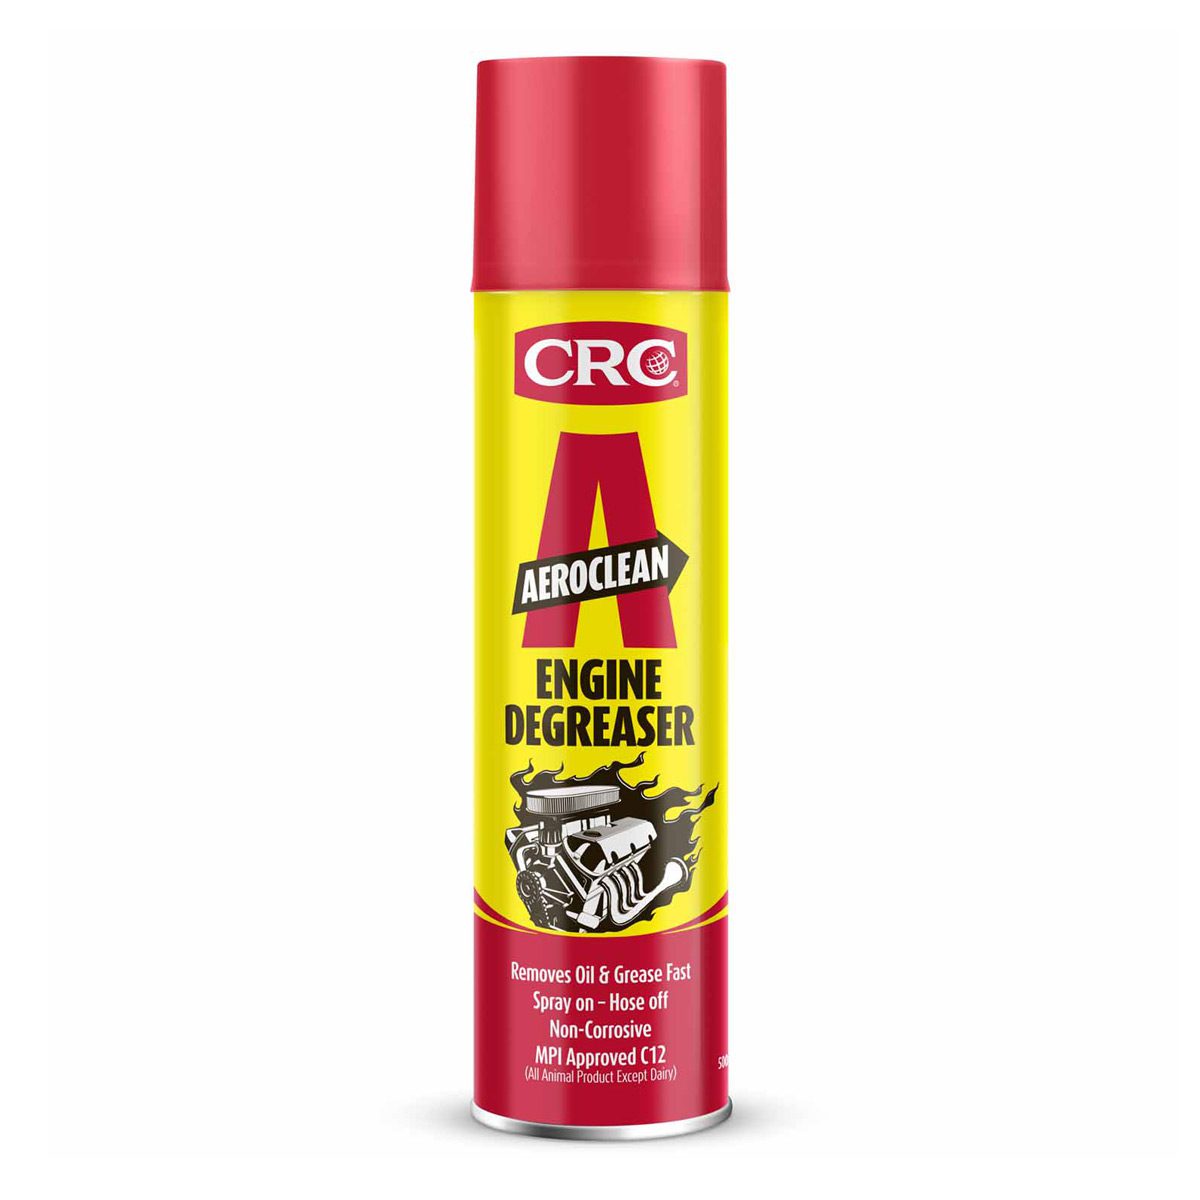 automotive-crc-aeroclean-degreaser-concentrated-jet-of-cleaning-solution-that-dissolves-and-removes-oil-and-grease-from-dirty-engines-500ml-vjs-distributors-C5070